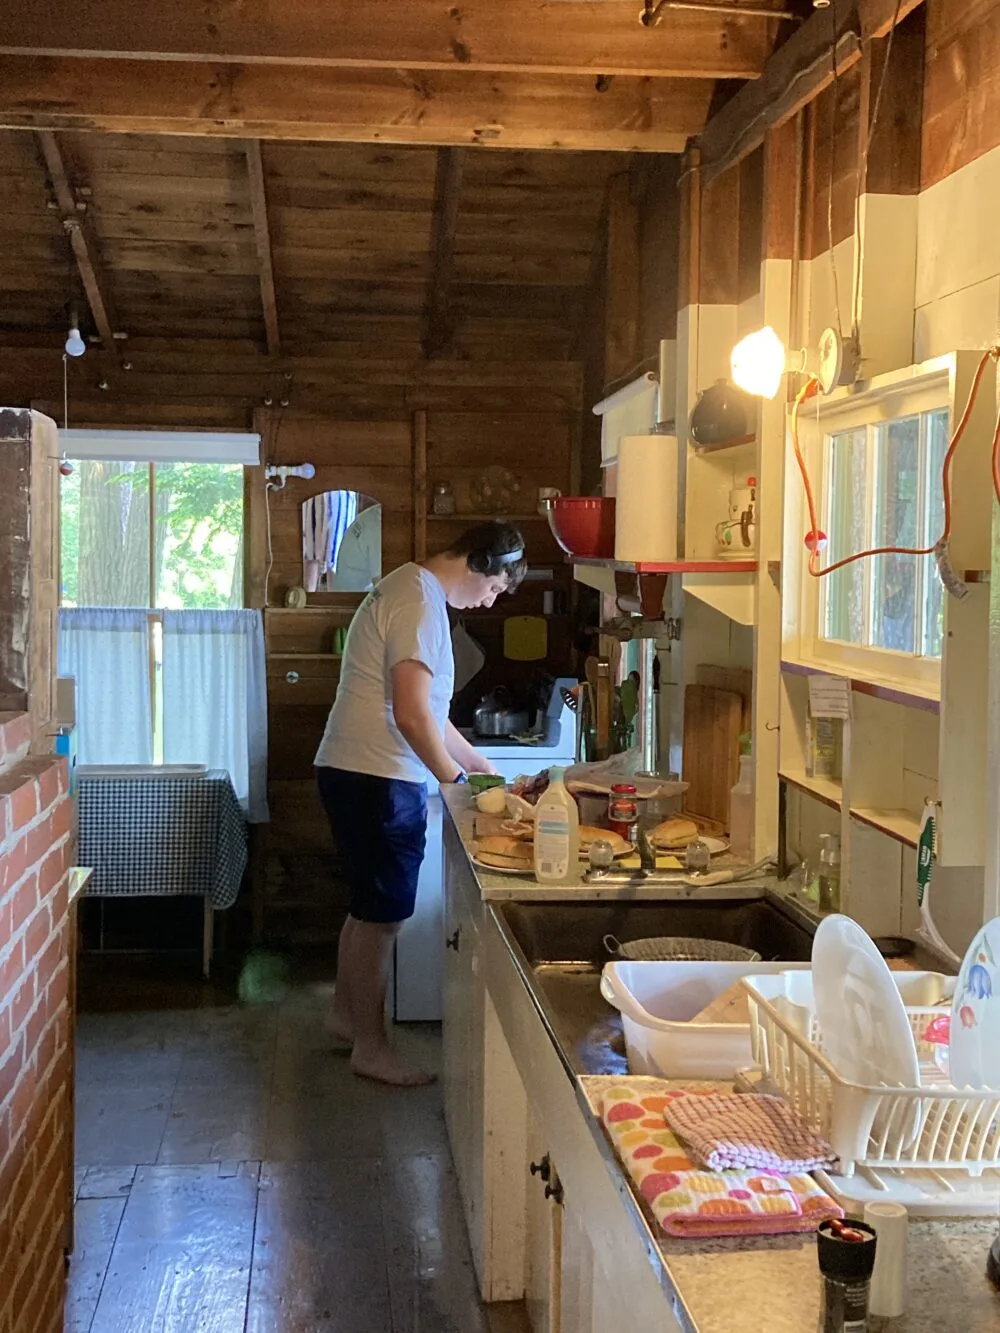 A young man is shown making lunch in a rustic rental cabin kitchen.